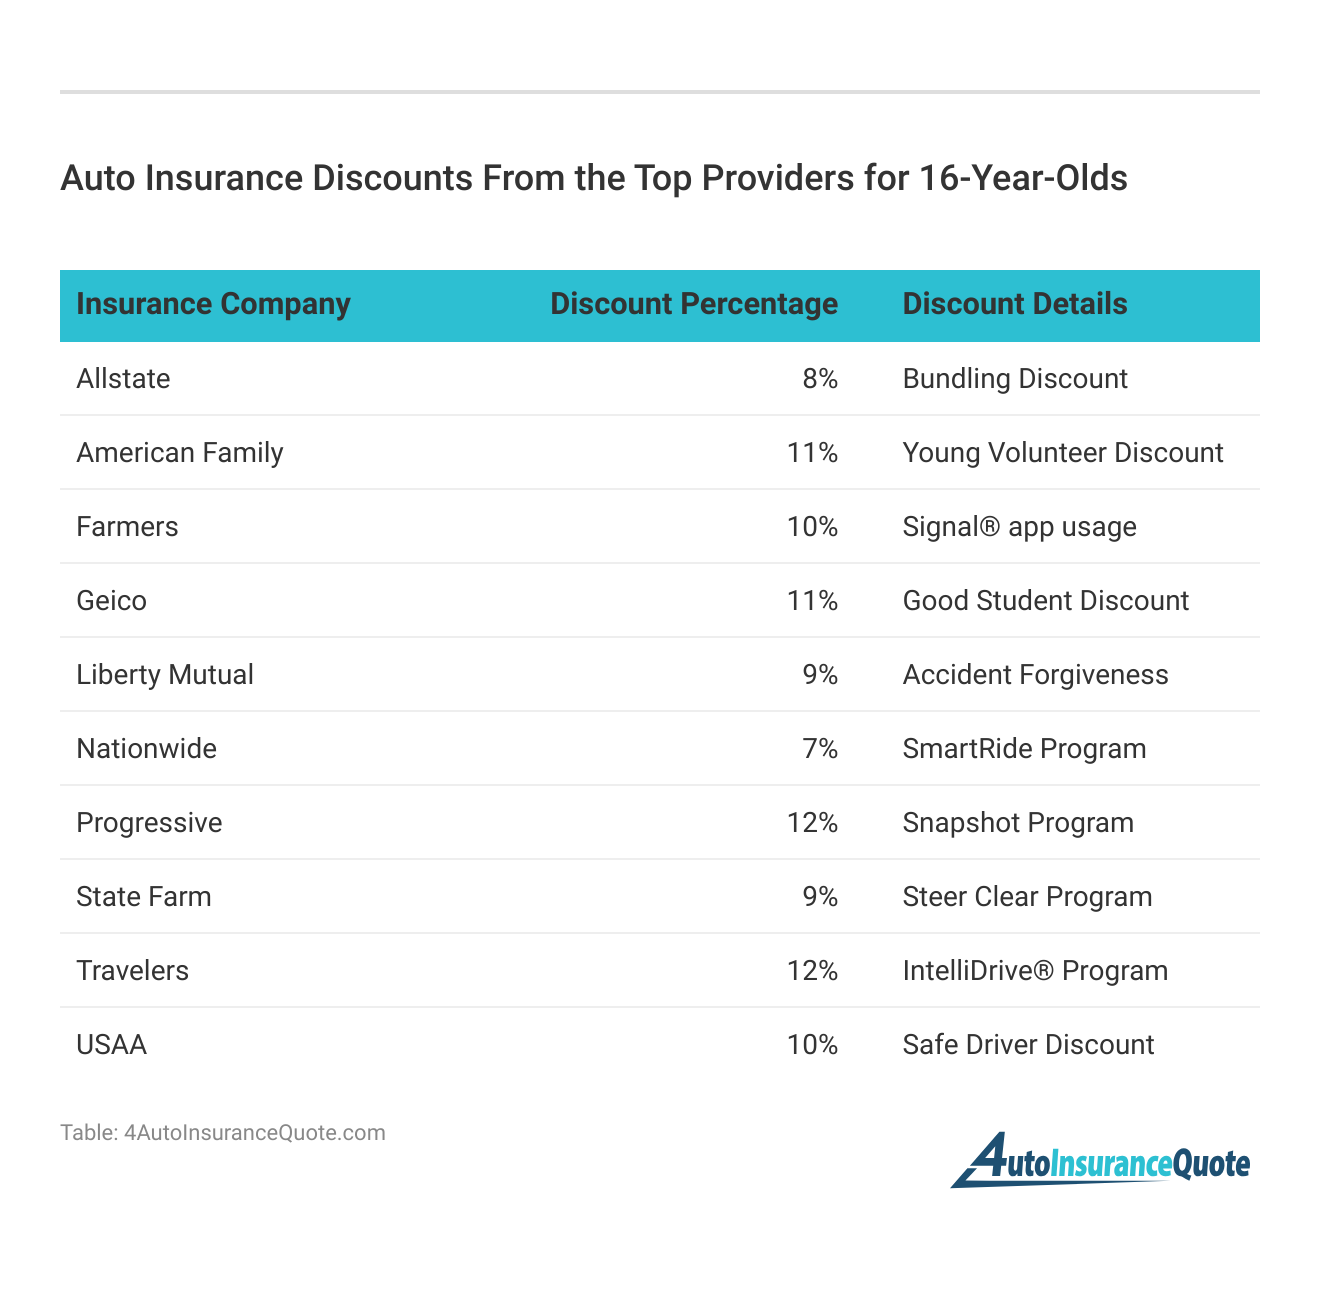 <h3>Auto Insurance Discounts From the Top Providers for 16-Year-Olds</h3>